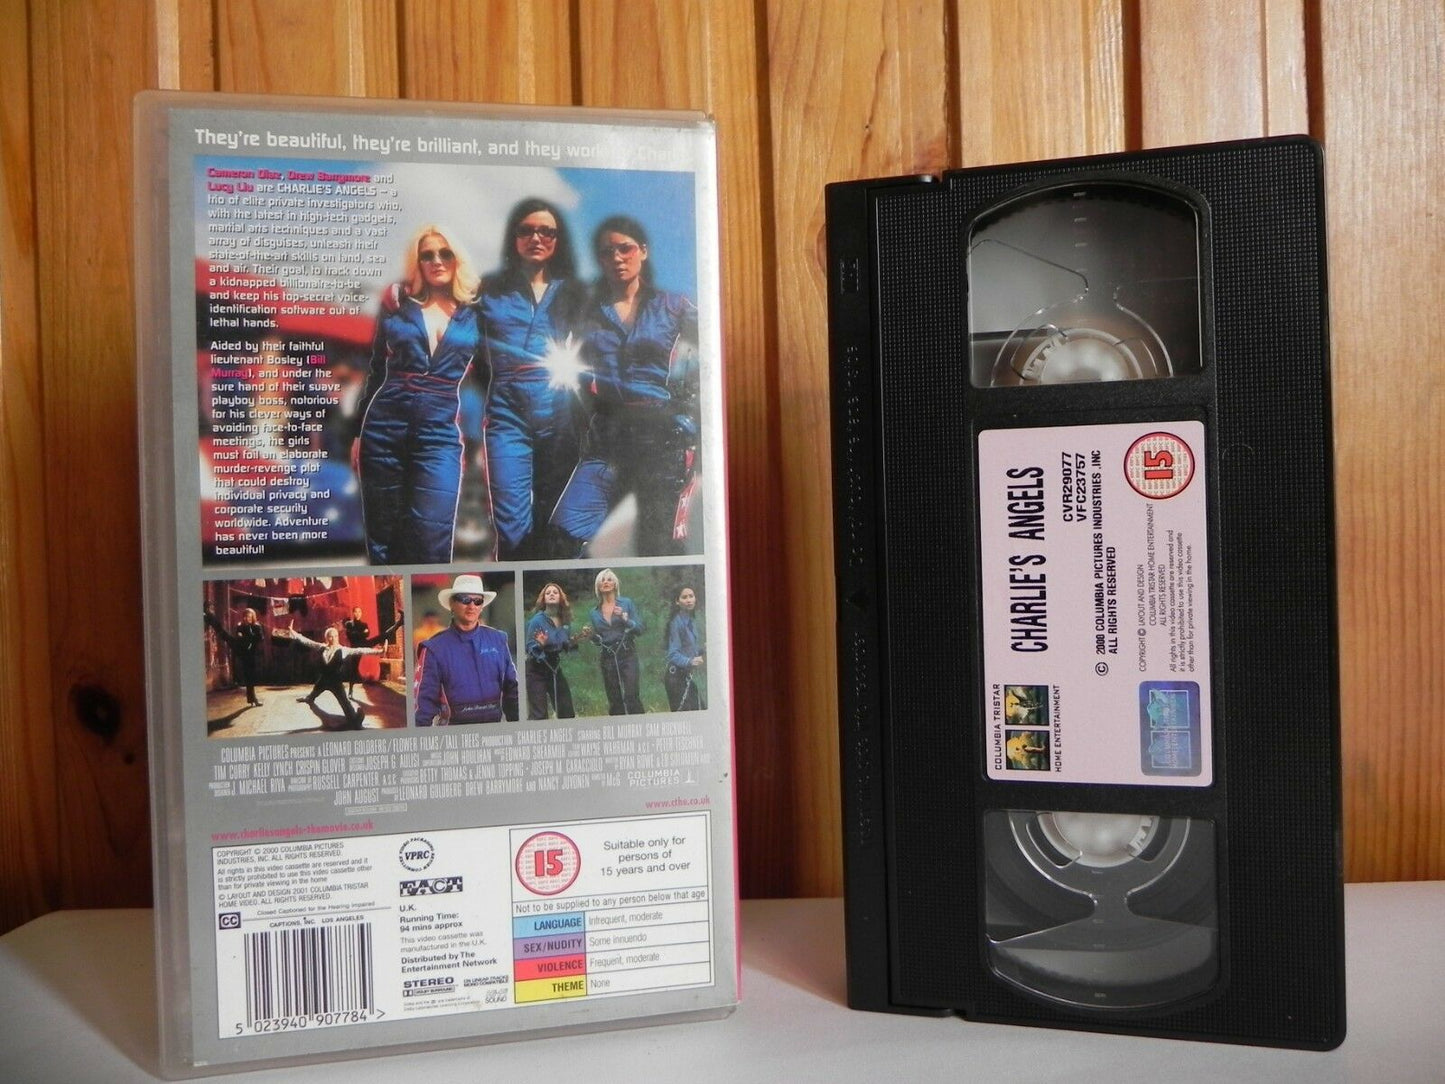 Charlie's Angels - Columbia - Comedy - Cameron Diaz - Drew Barrymore - Pal VHS-